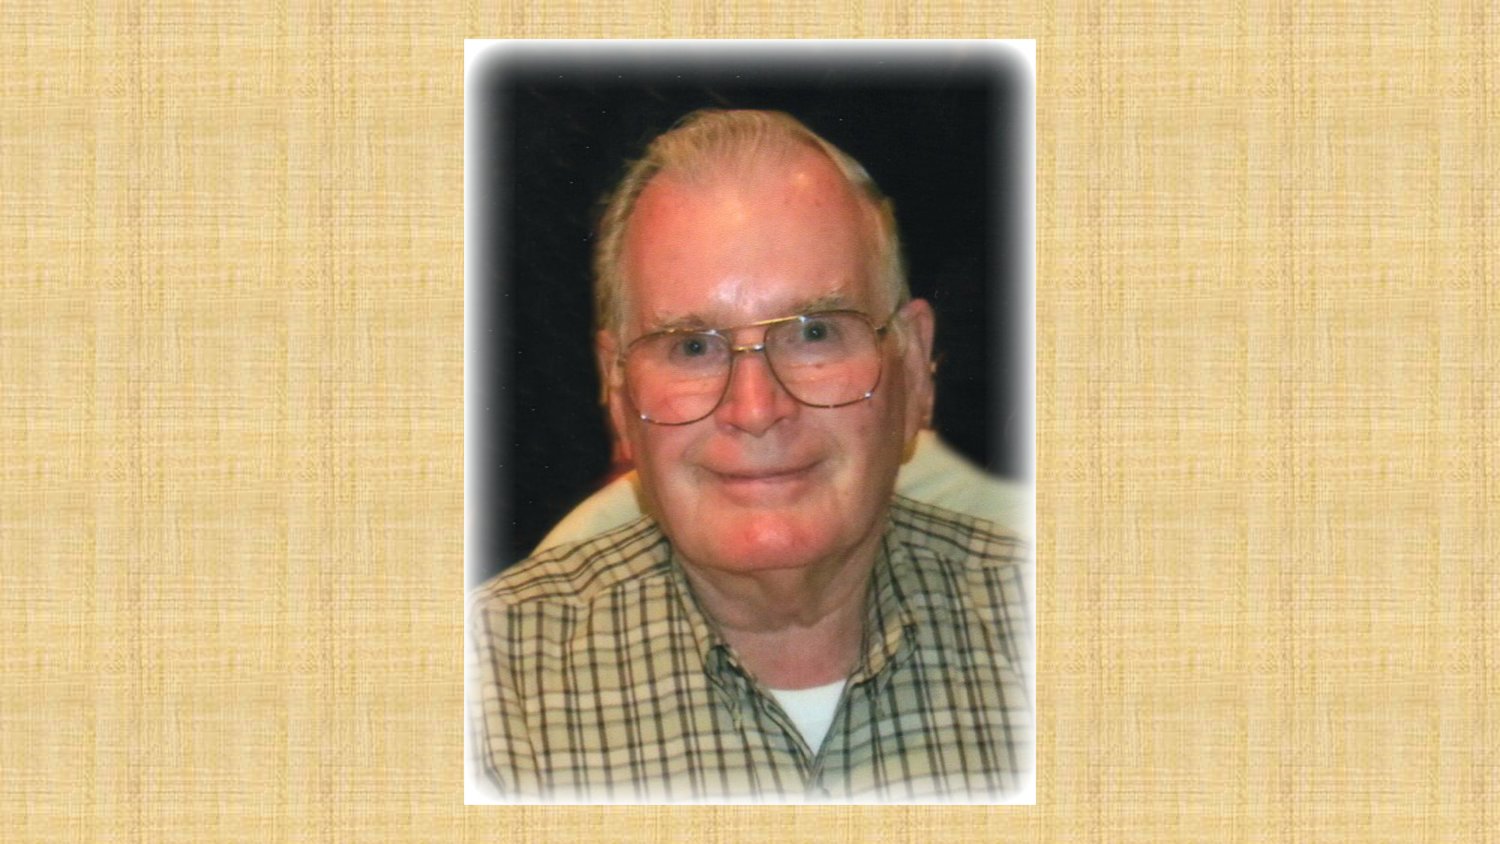 Bernard White passed away at the age of 92 on Feb. 8. White was a husband, father, loving friend and veteran who lived in Katy for decades prior to moving to Carthage. He is dearly missed by his family and loved ones.